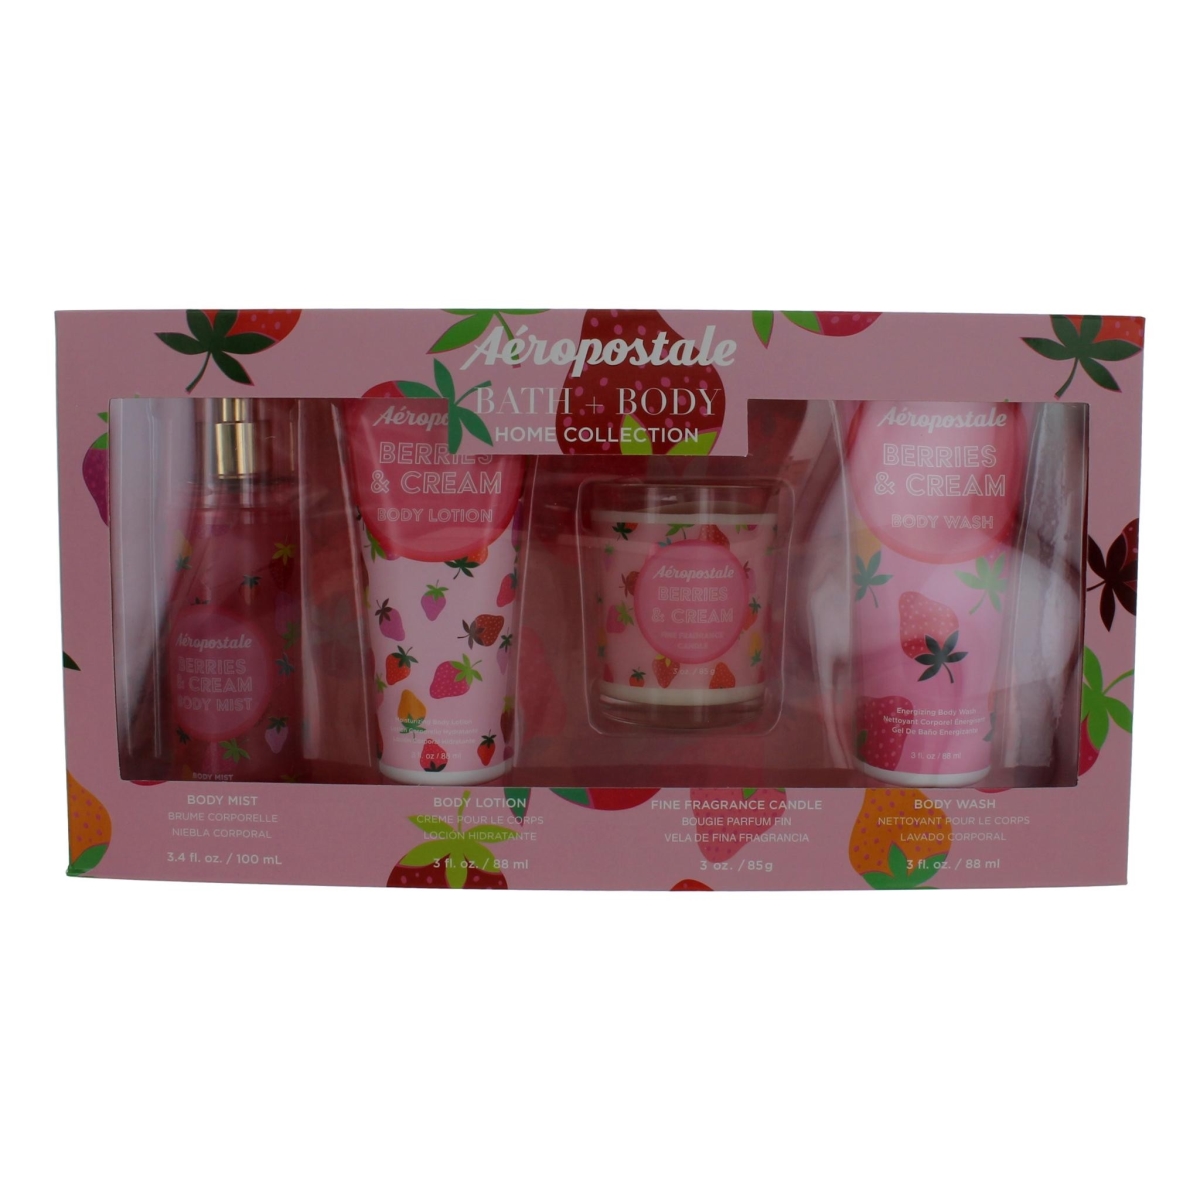 Picture of Aeropostale awgapbc4 Bath & Body Home Collection Gift Set - 4 Piece